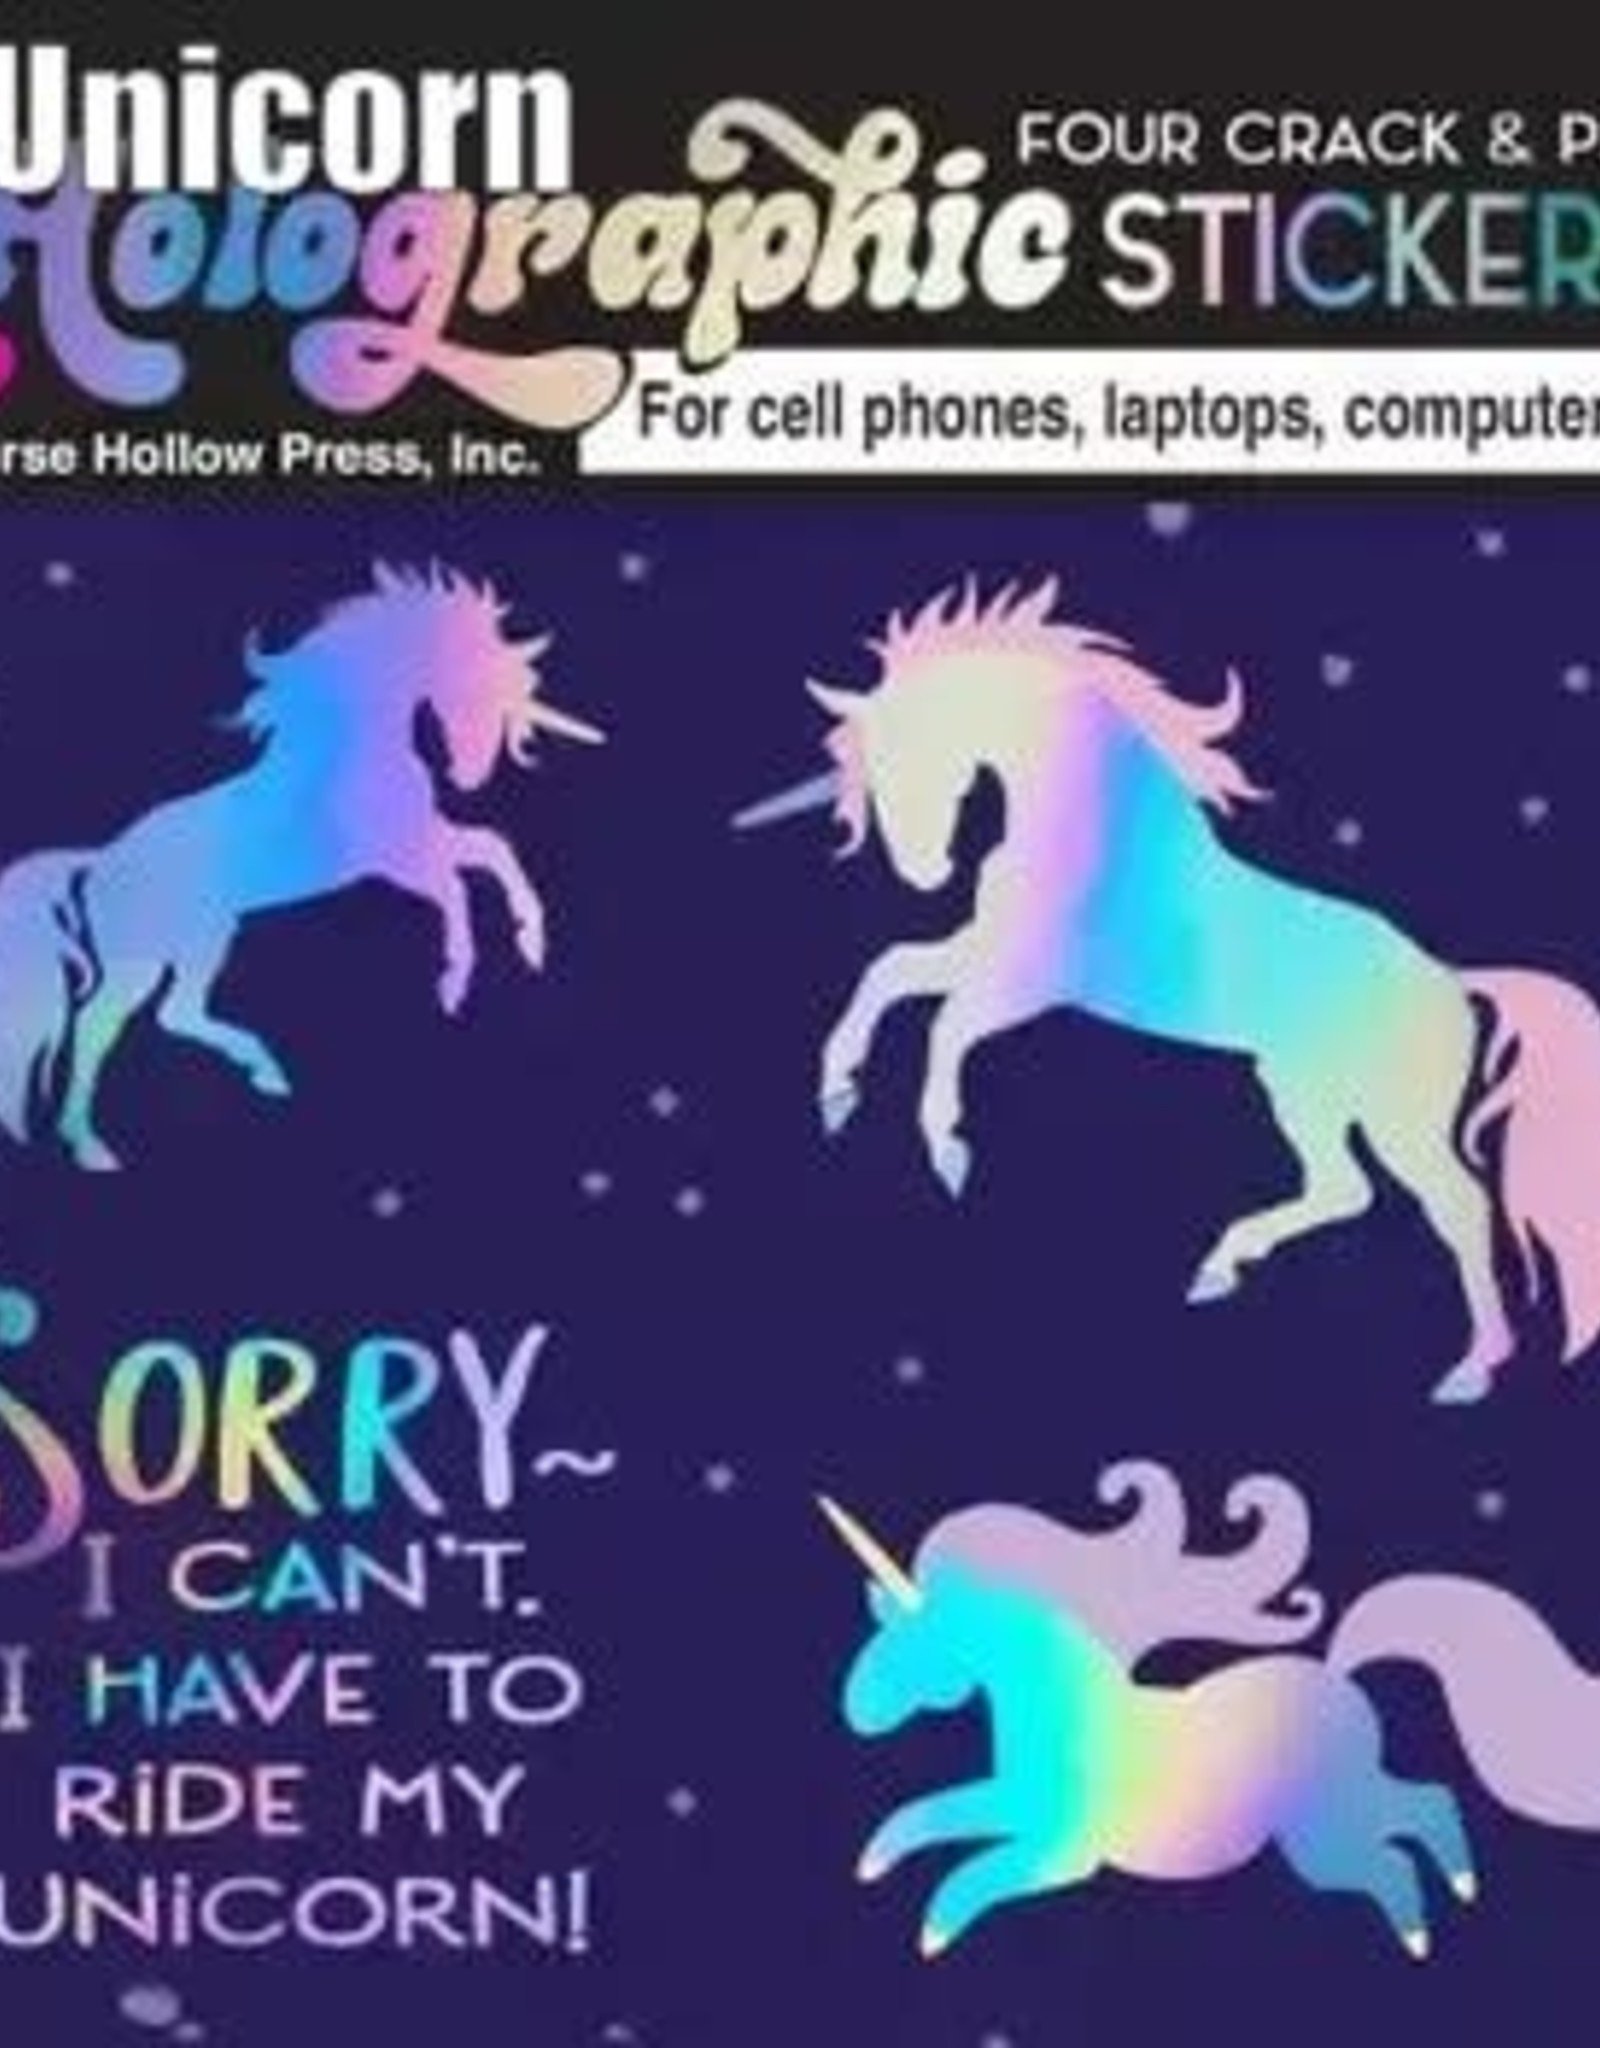 Horse Hollow Press Holographic -4 Crack and Peel Stickers